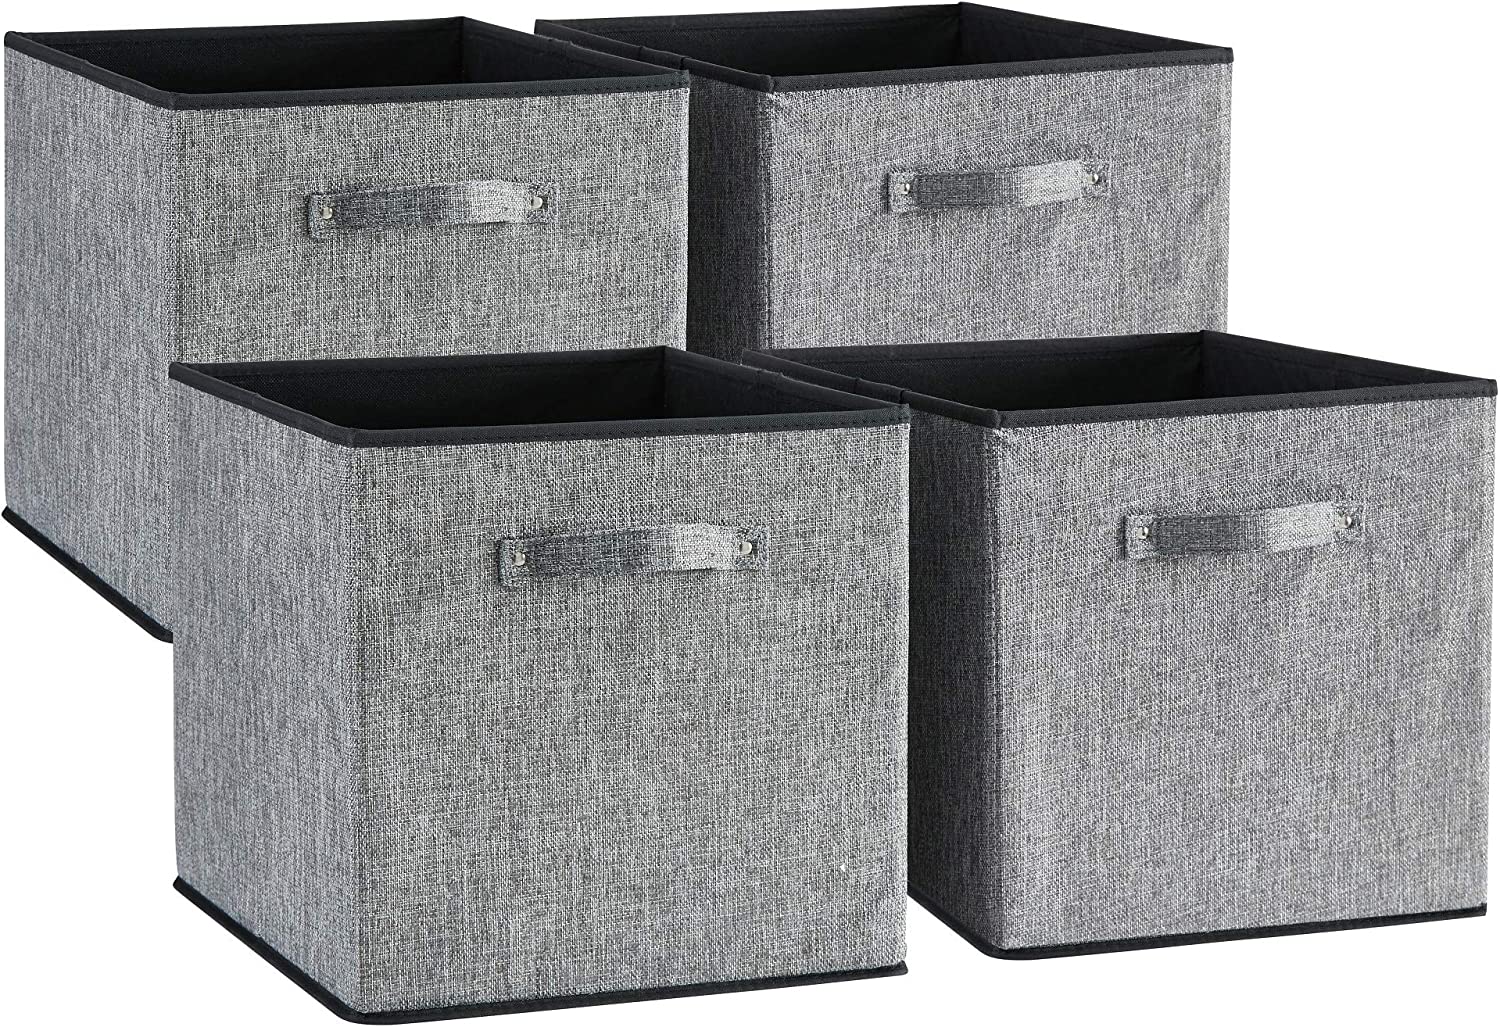 3Pack Onlycube Foldable Storage Bins 13x13x13 inch for Cube Organizer with Cotton Rope Handles Collapsible Basket Box Organizer for Shelves and Closet Black 